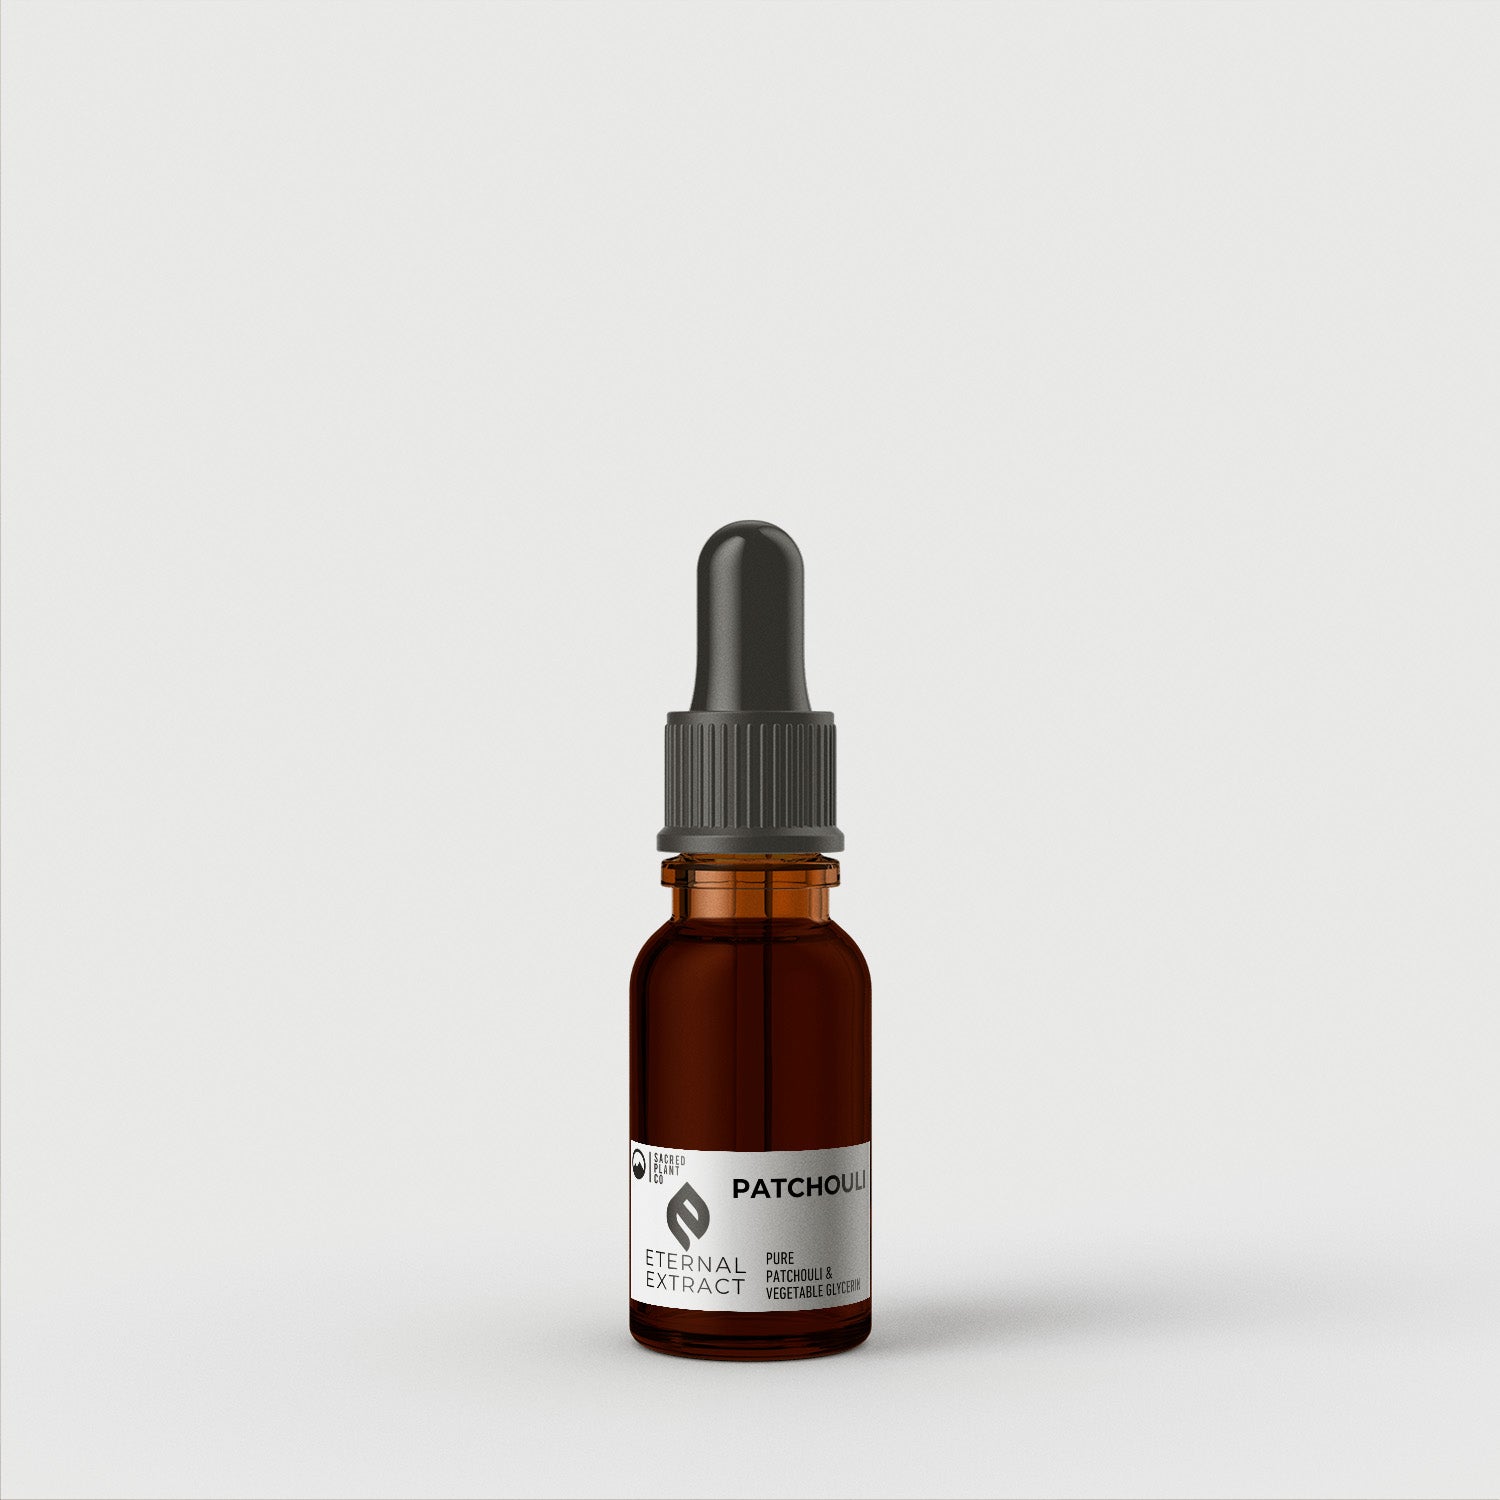 Patchouli Eternal Extract by Sacred Plant Co, featuring pure extract for grounding aroma and skincare benefits, in a minimalist bottle design.